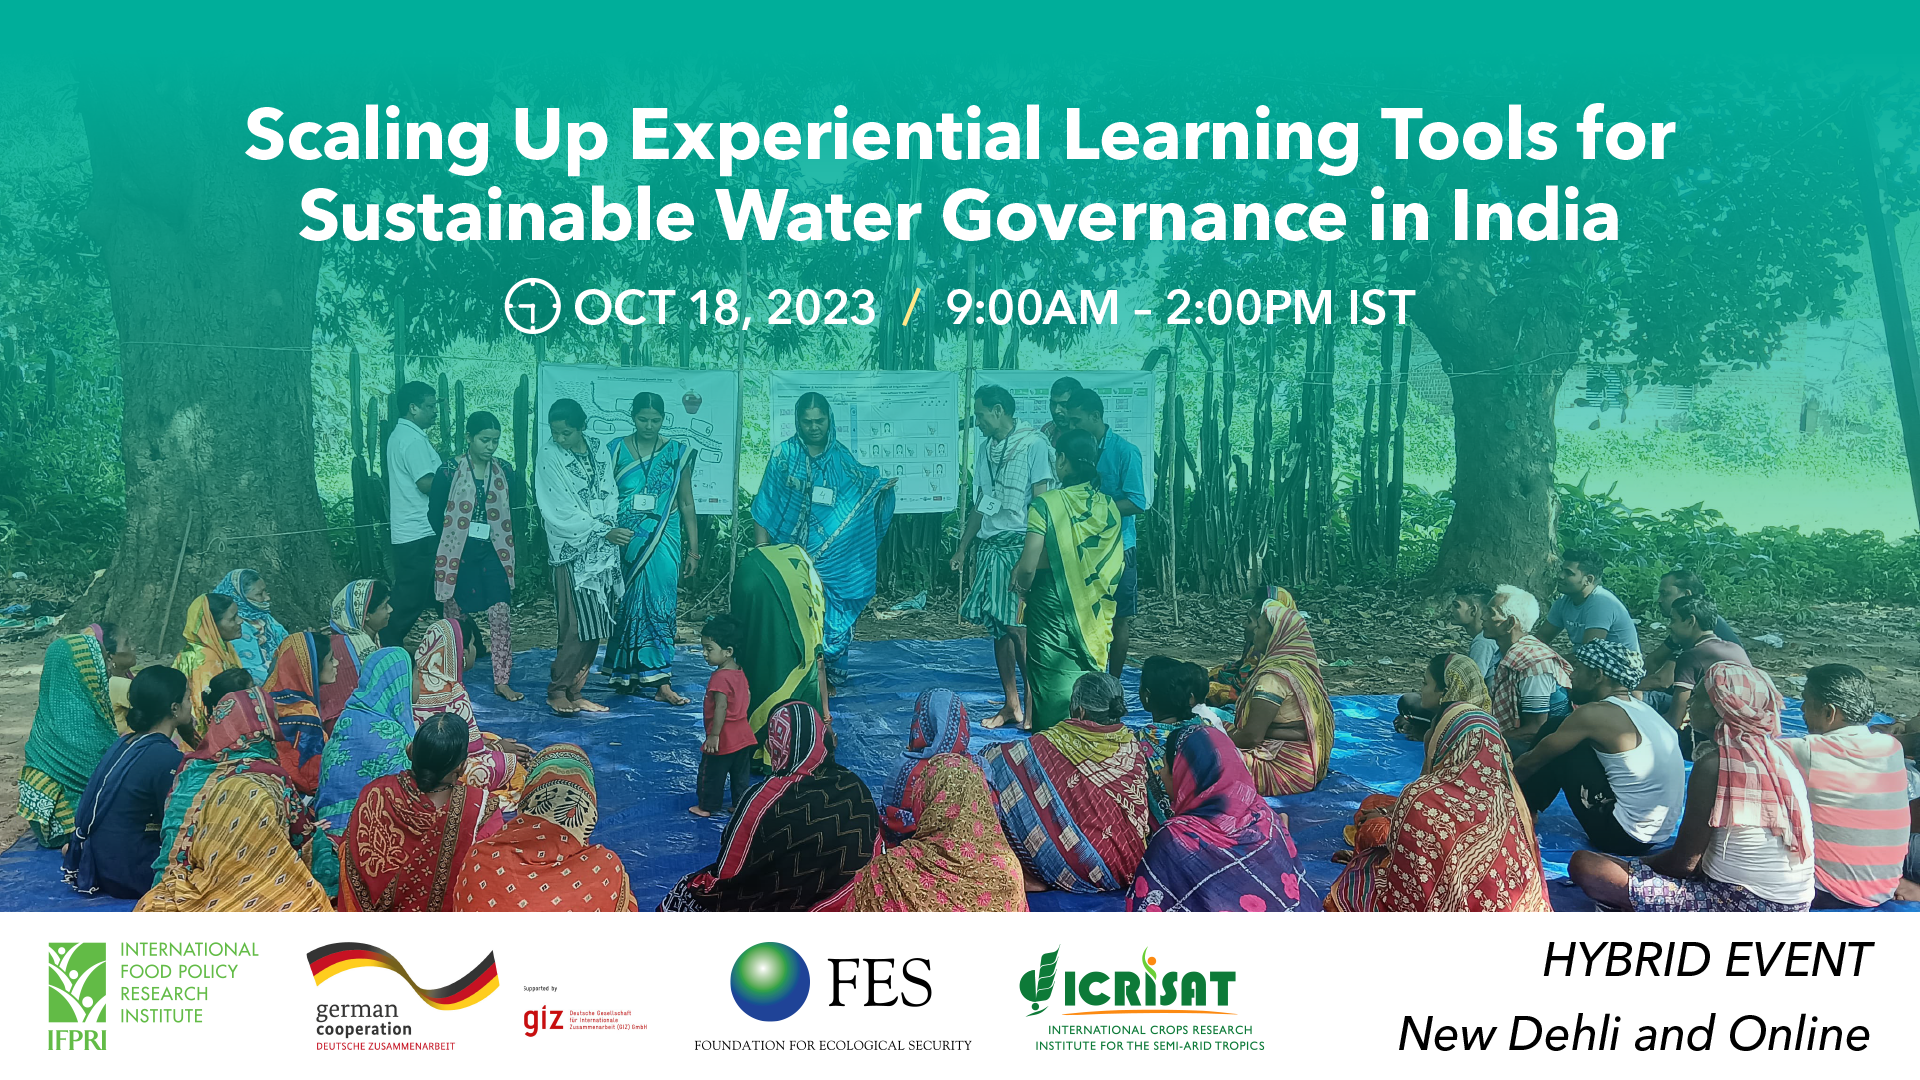 Scaling Up Experiential Learning Tools for Sustainable Water Governance in India